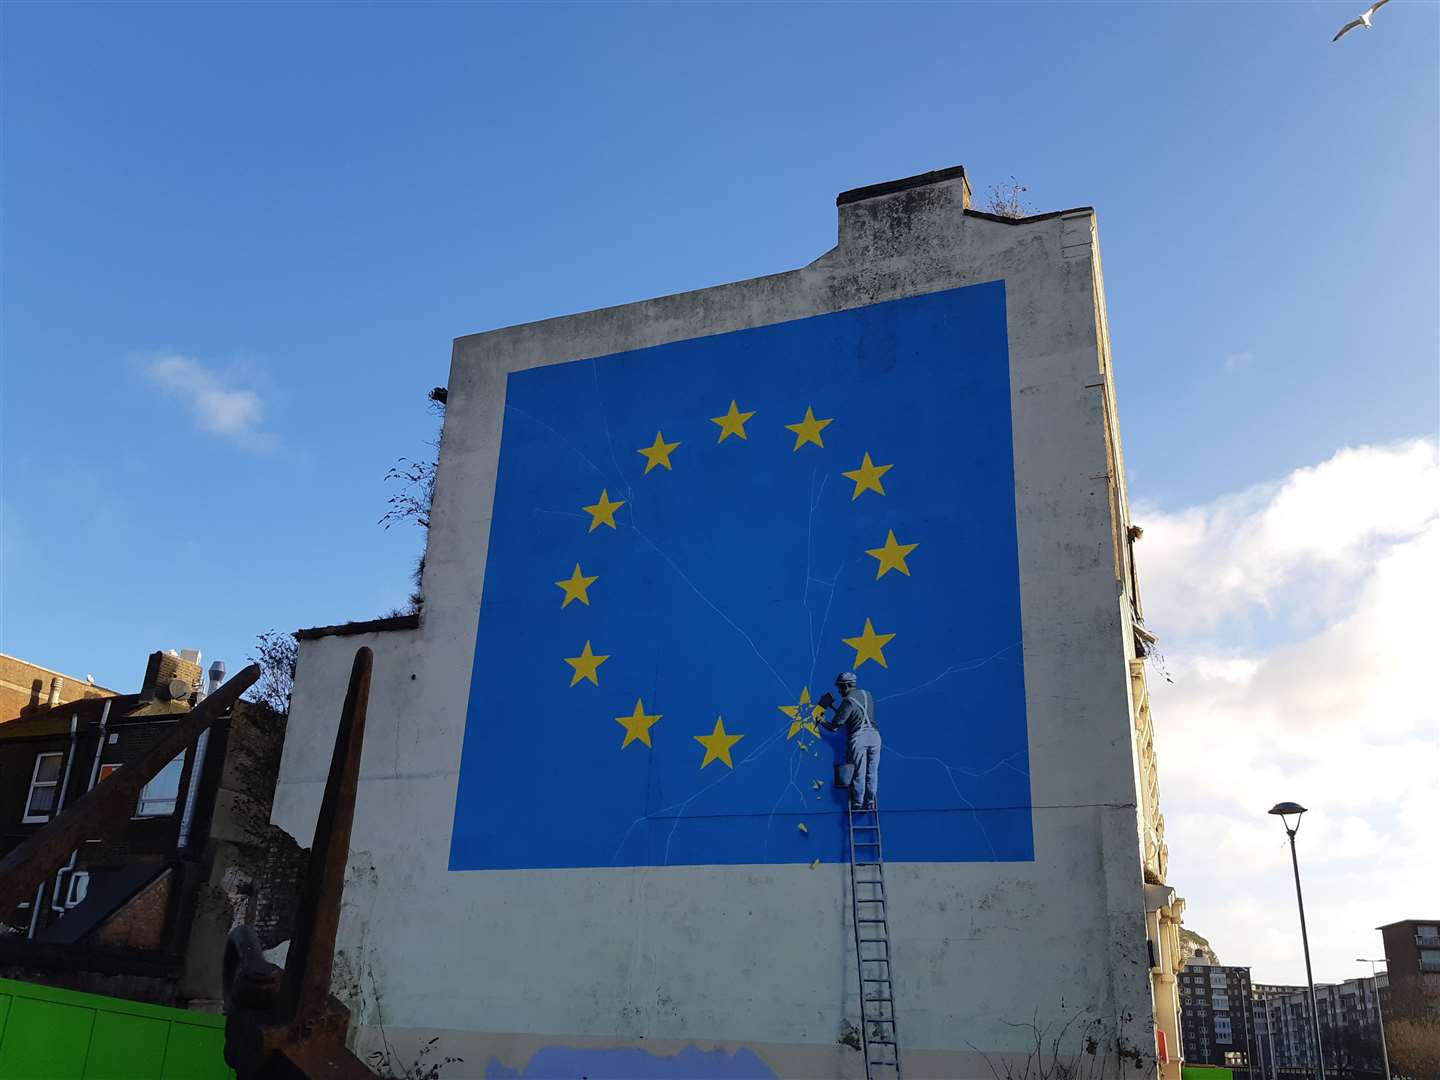 The Banksy Brexit mural in Dover, painted on the side of 11 Bench Street